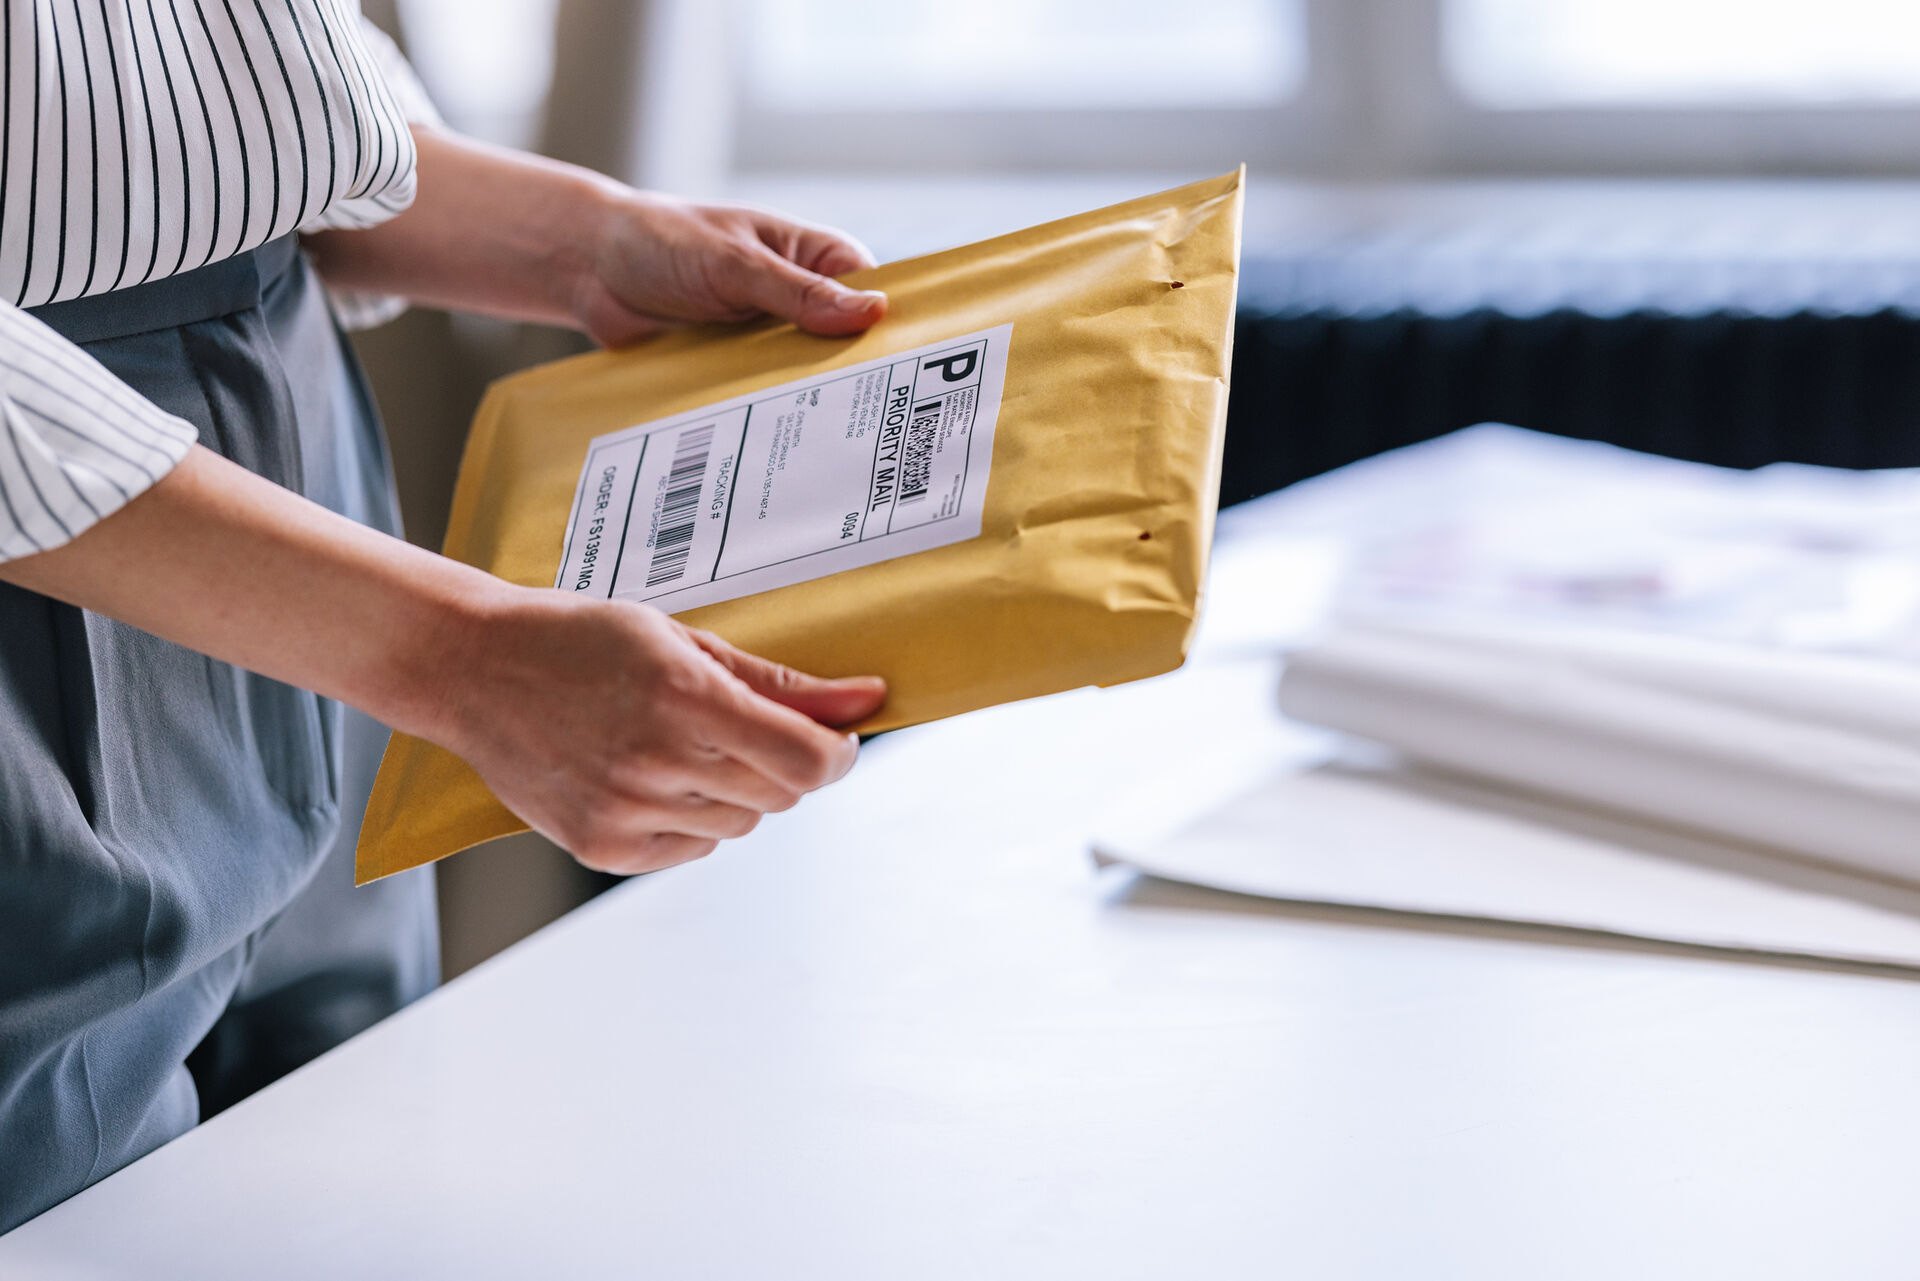 A woman holds a package with a printed shipping label in her hands.